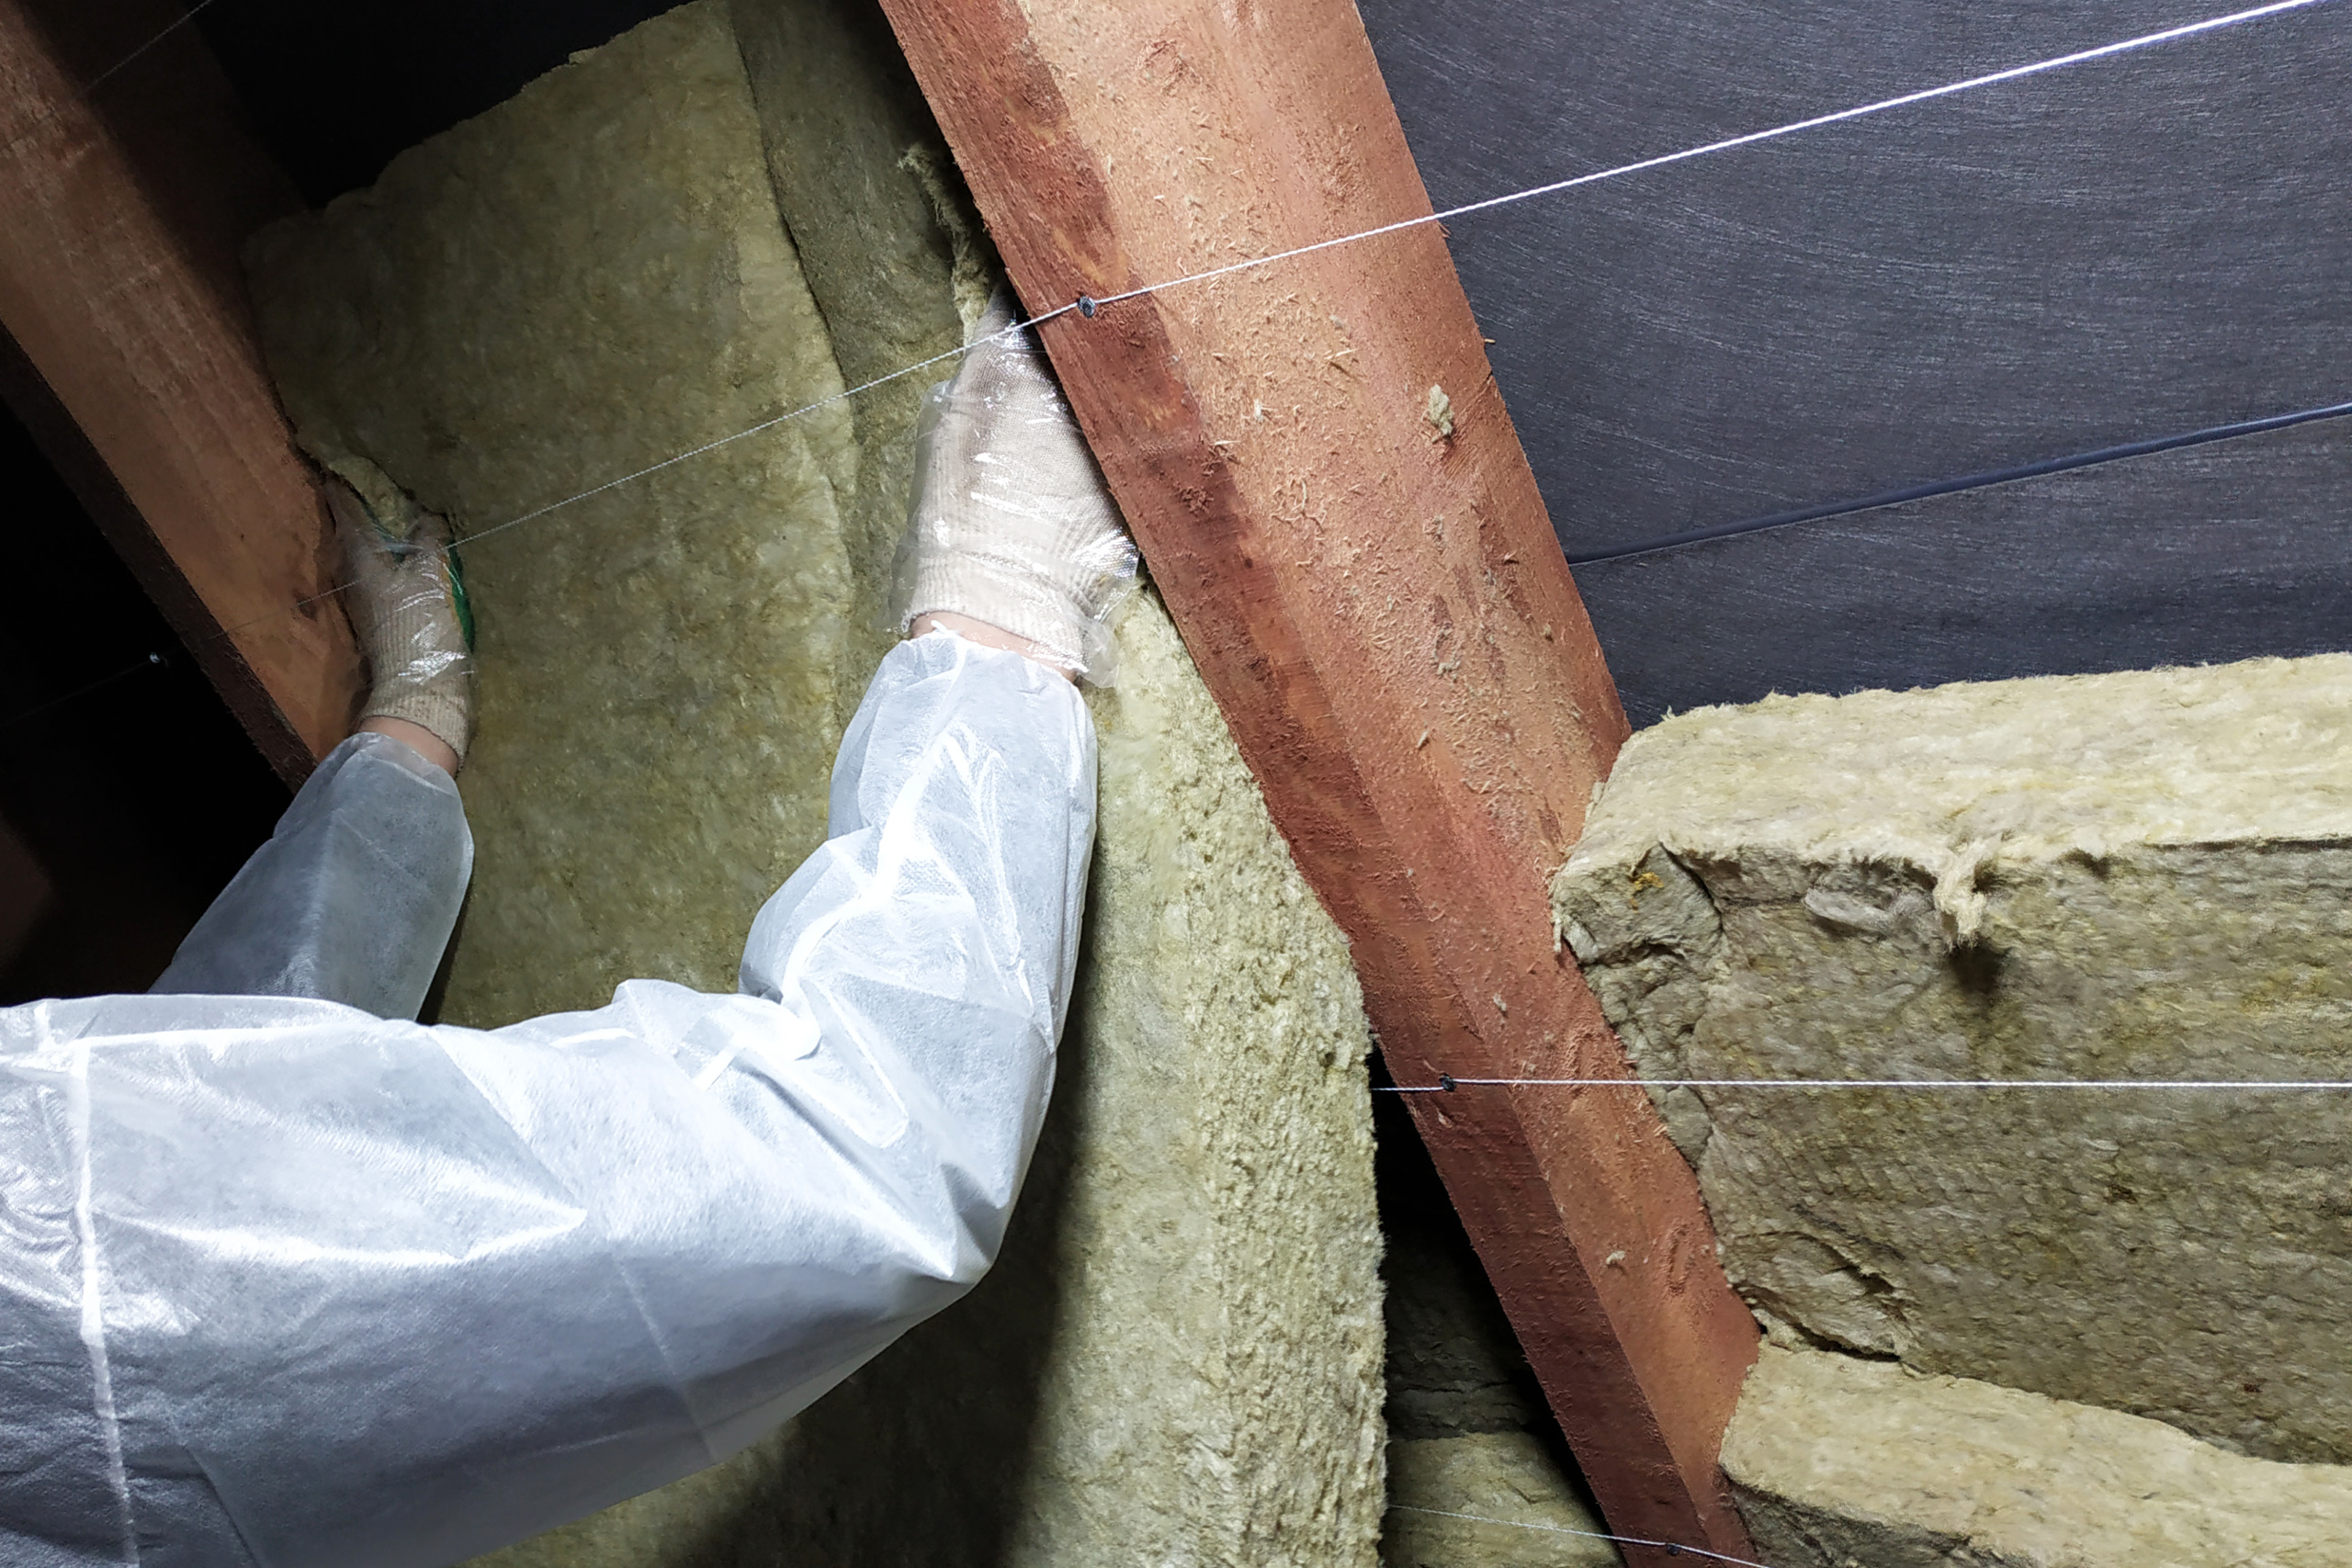 Man in protective gear installs new insulation in attic to winterize your home.